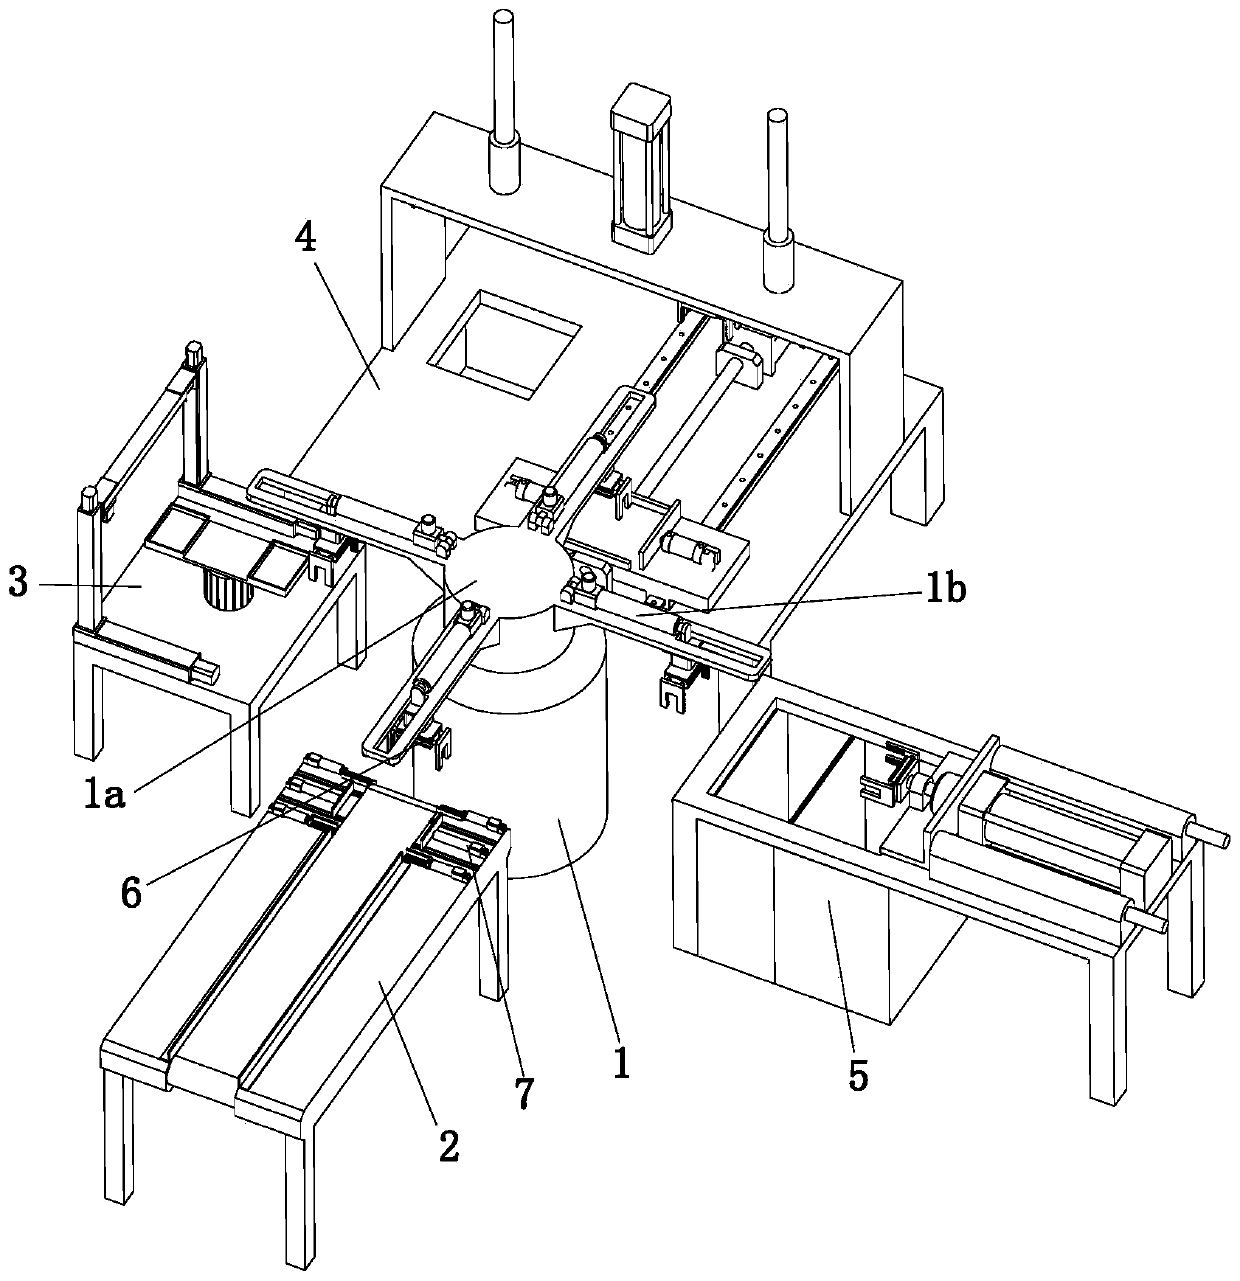 Disassembling device for waste power battery